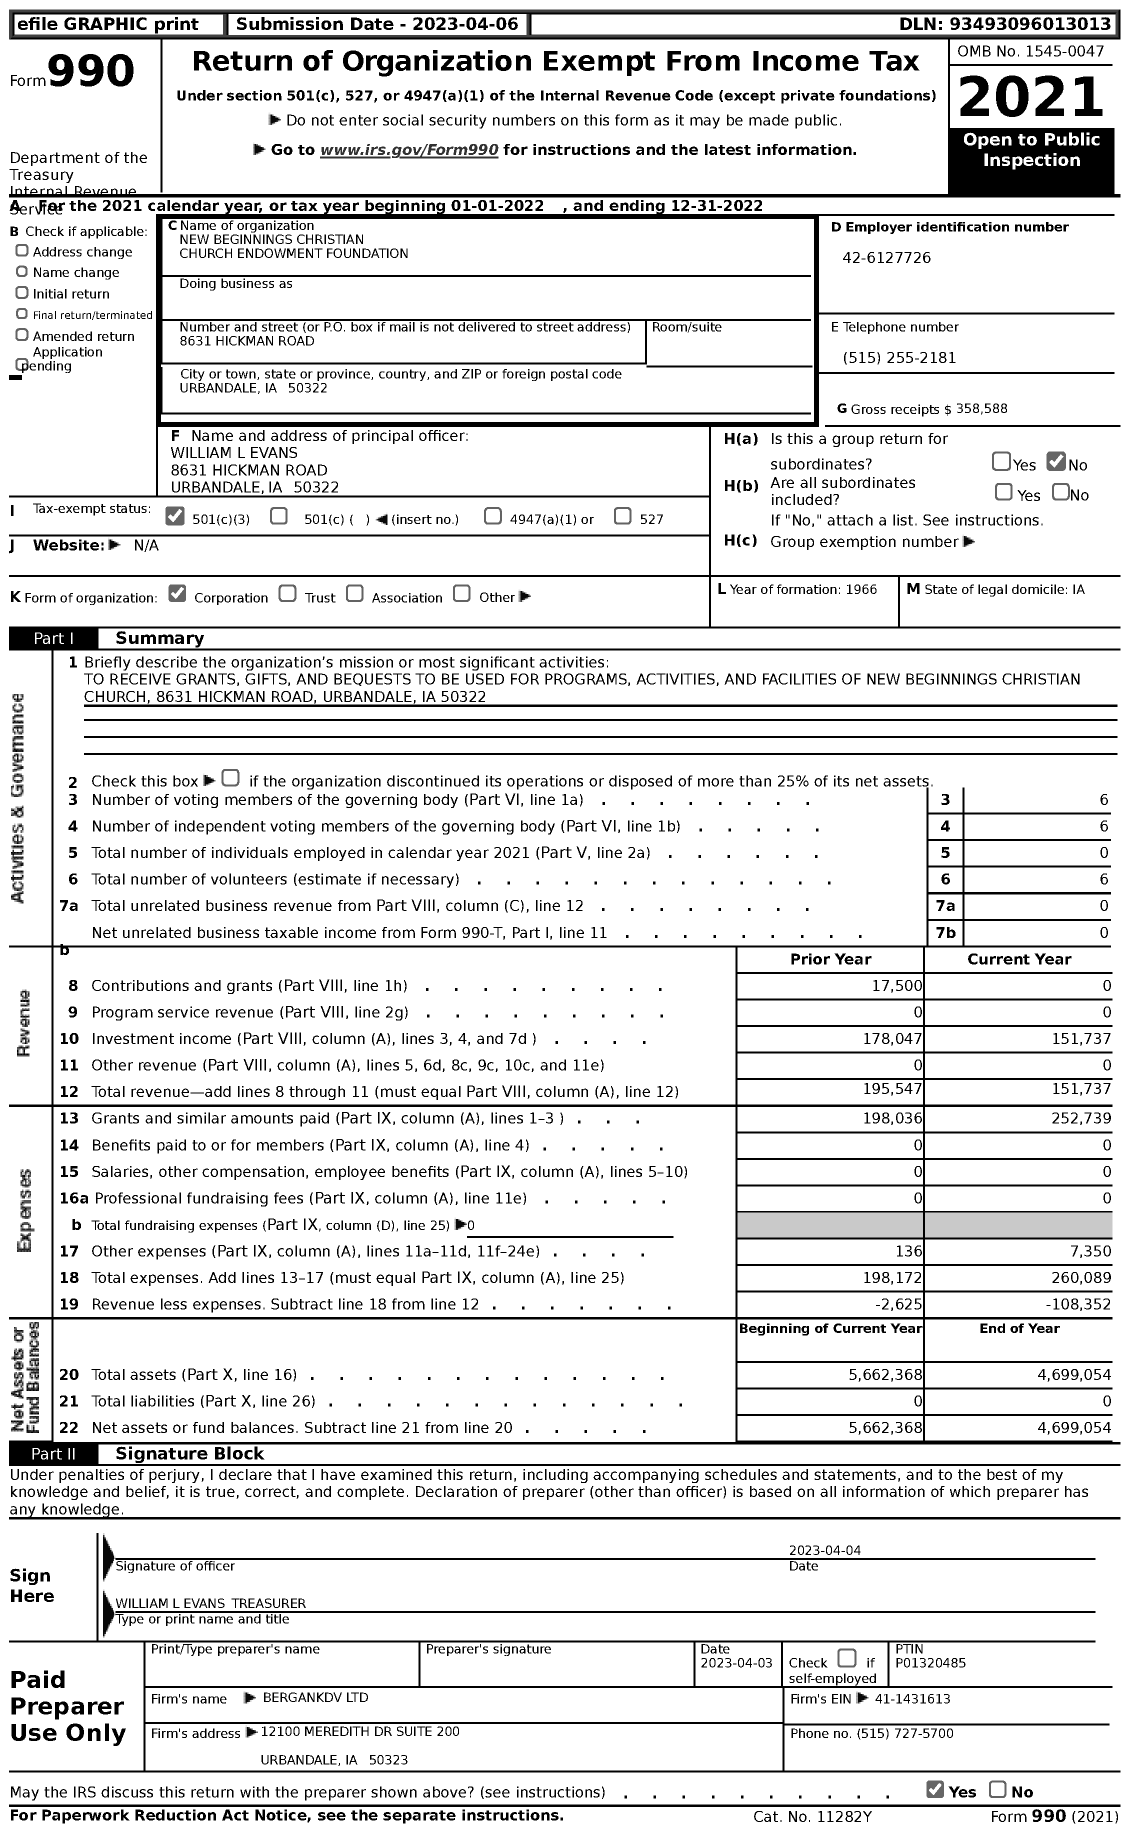 Image of first page of 2022 Form 990 for New Beginnings Christian Church Endowment Foundation